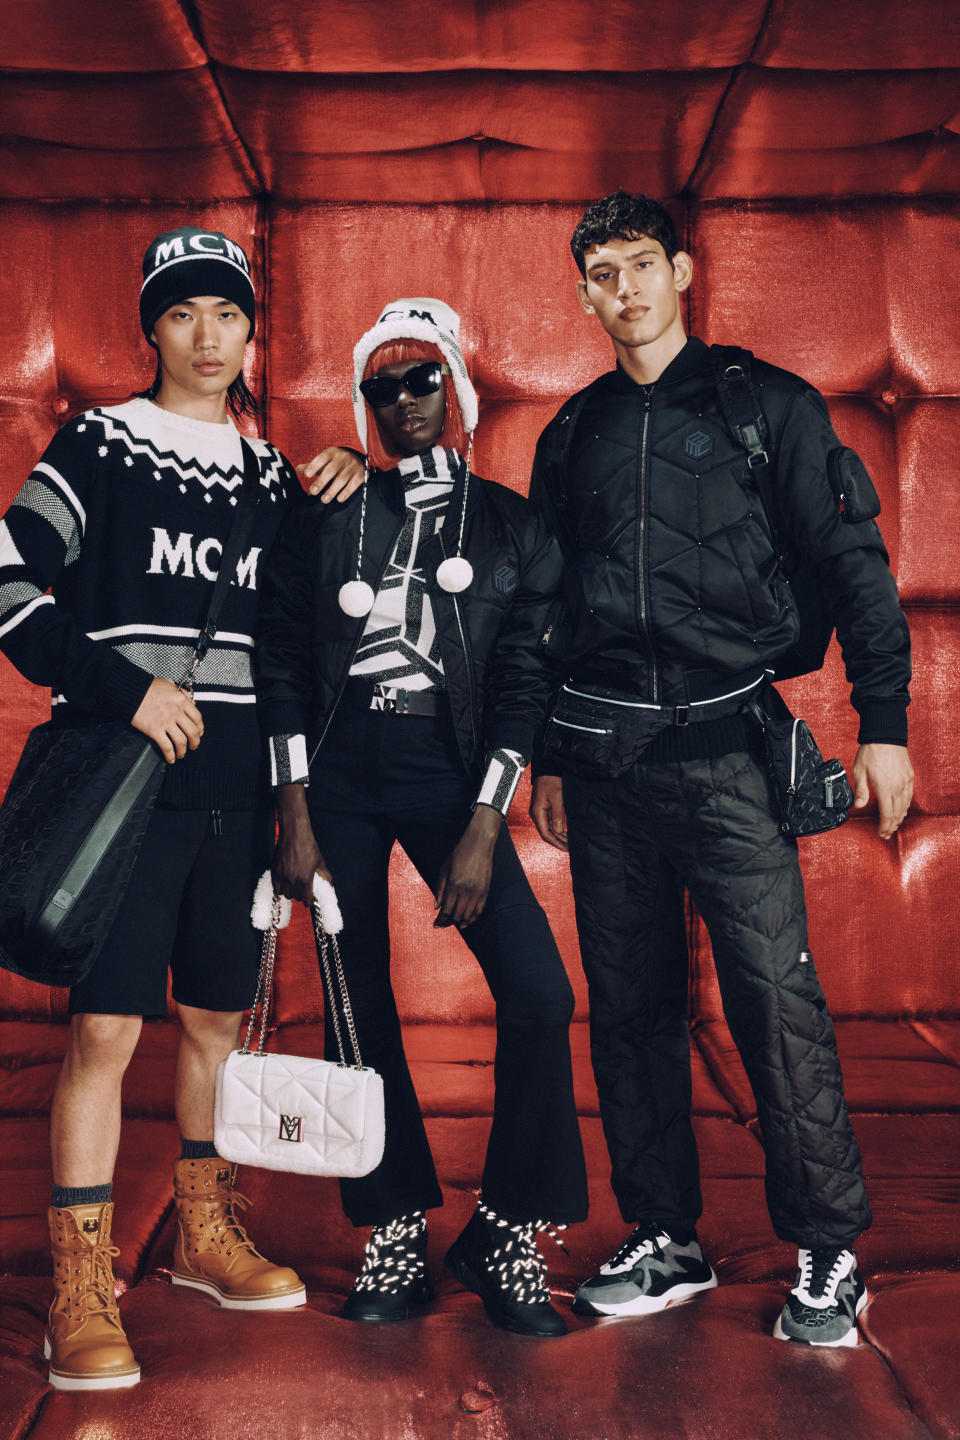 Some looks from MCM featured in the holiday campaign.